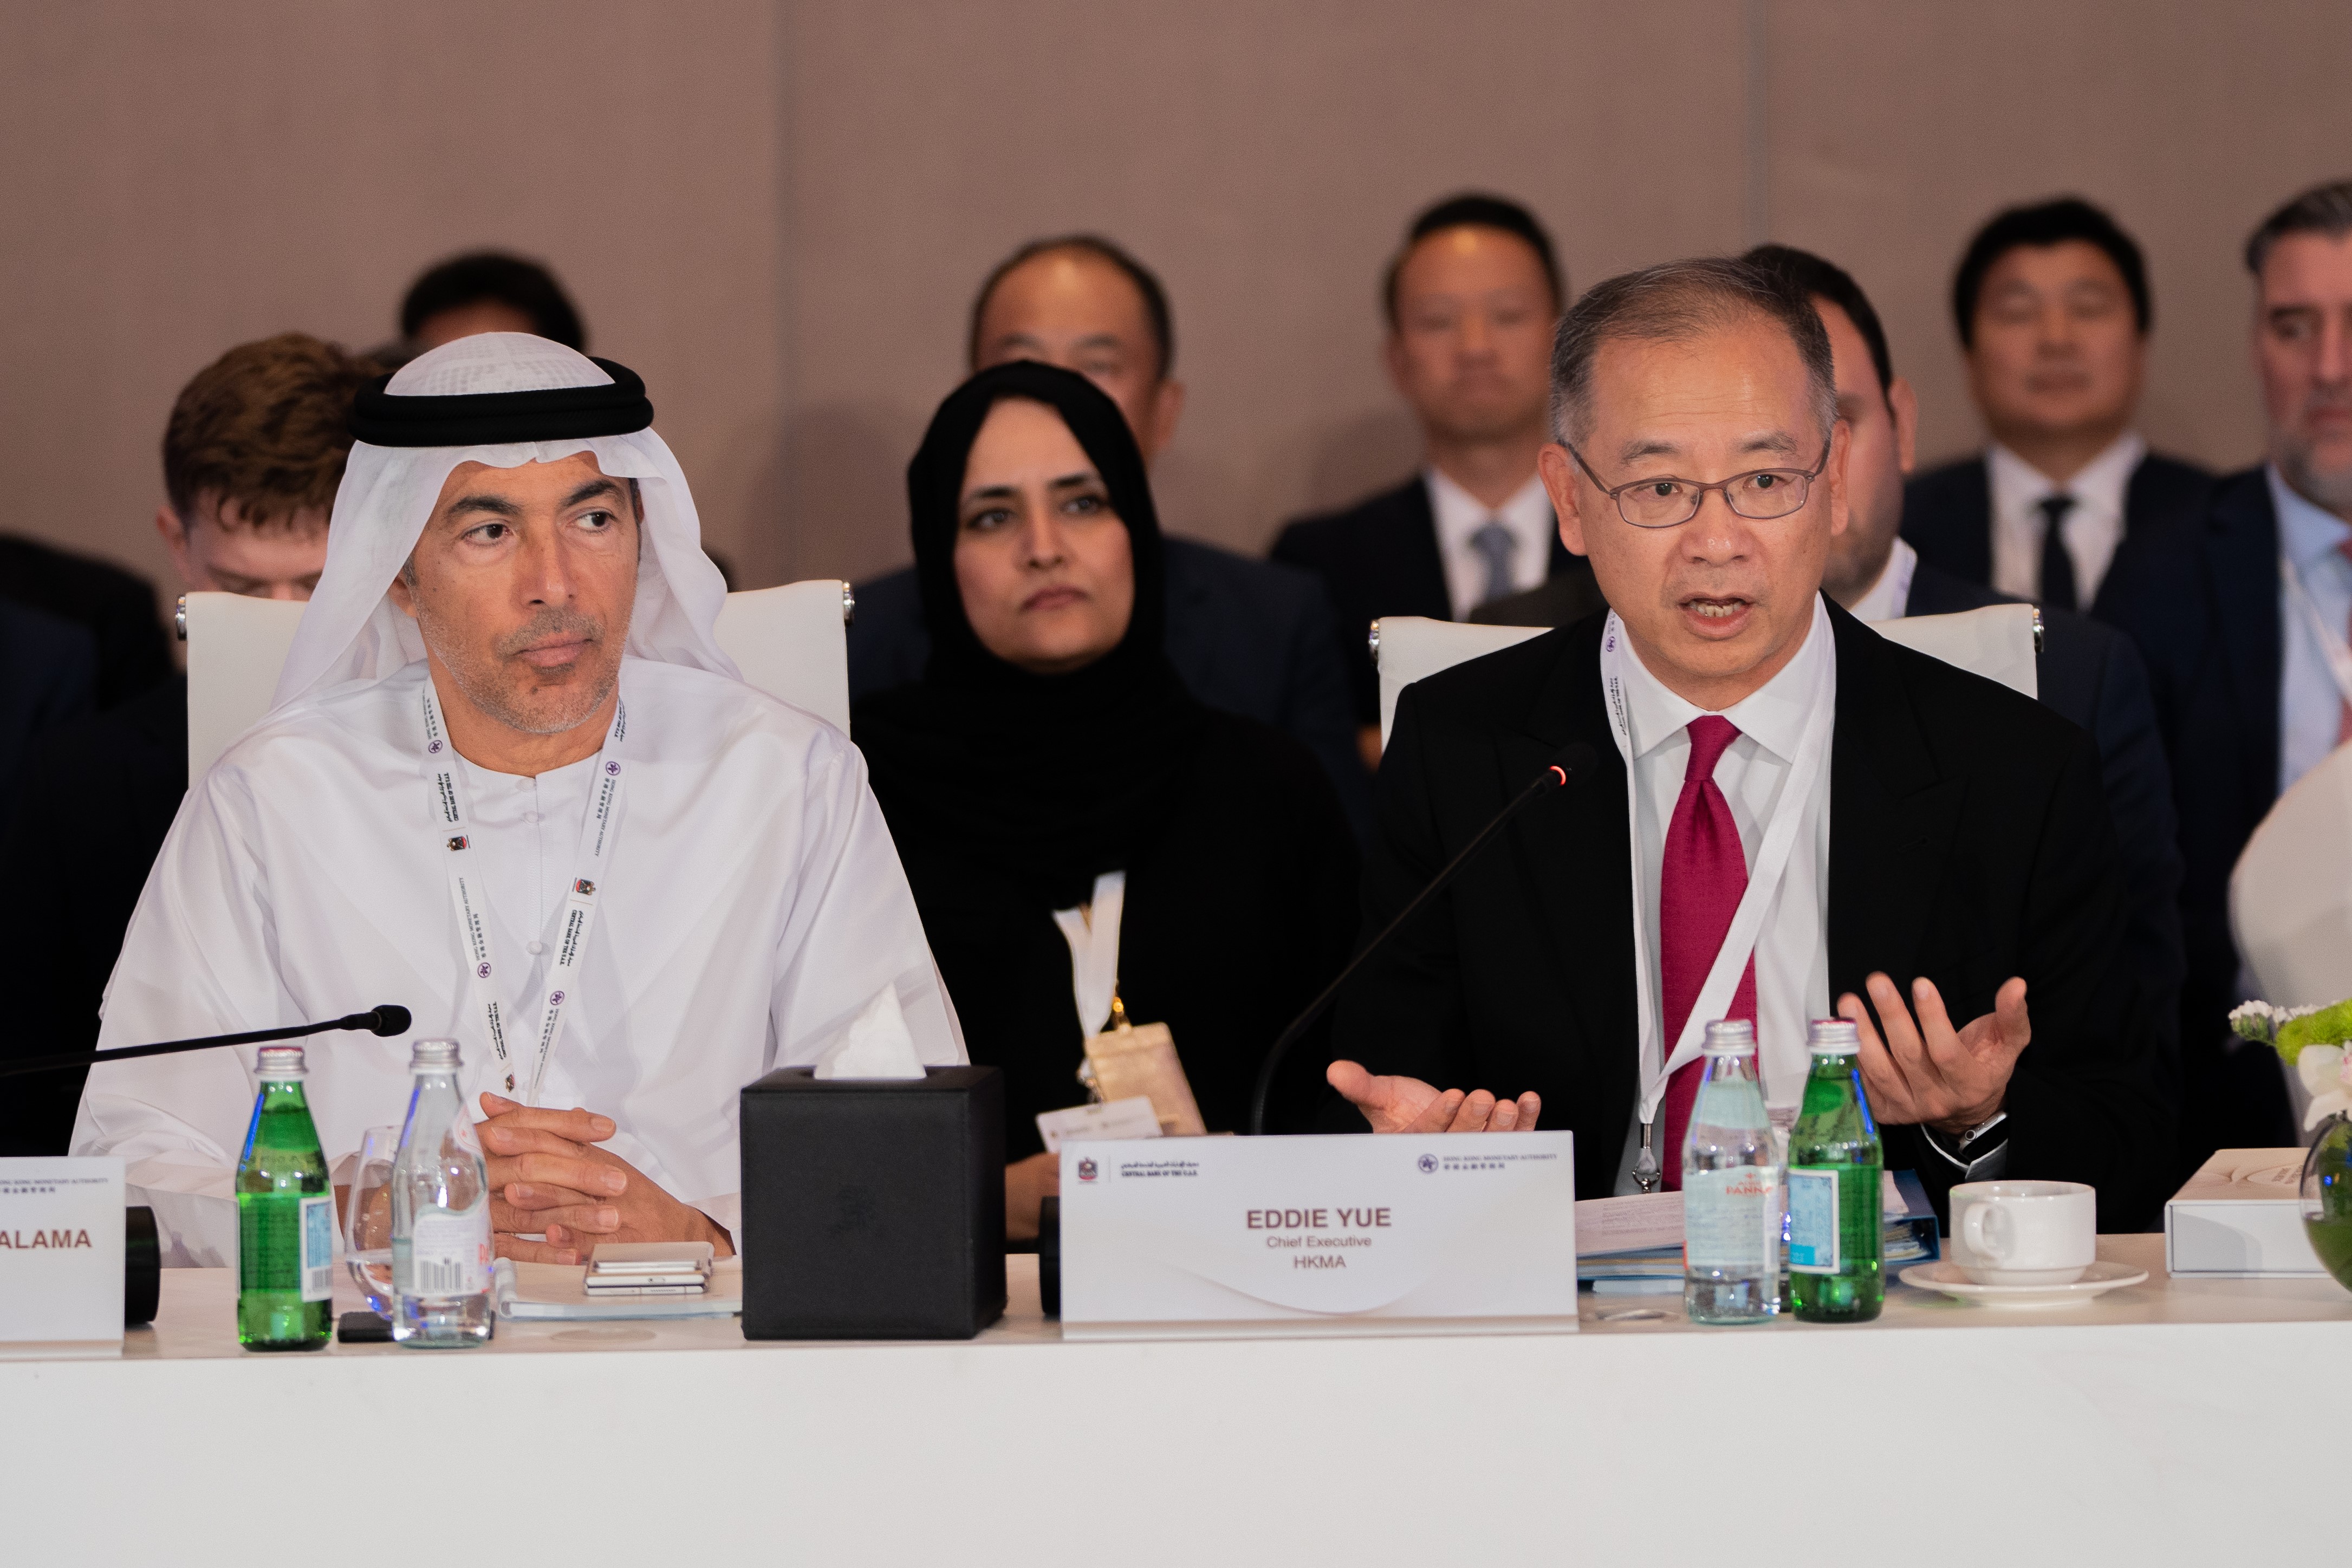 The Chief Executive of the Hong Kong Monetary Authority, Mr Eddie Yue (right), met with the Governor of the Central Bank of the United Arab Emirates, H.E. Khaled Mohamed Balama (left) on May 29 (Abu Dhabi time).